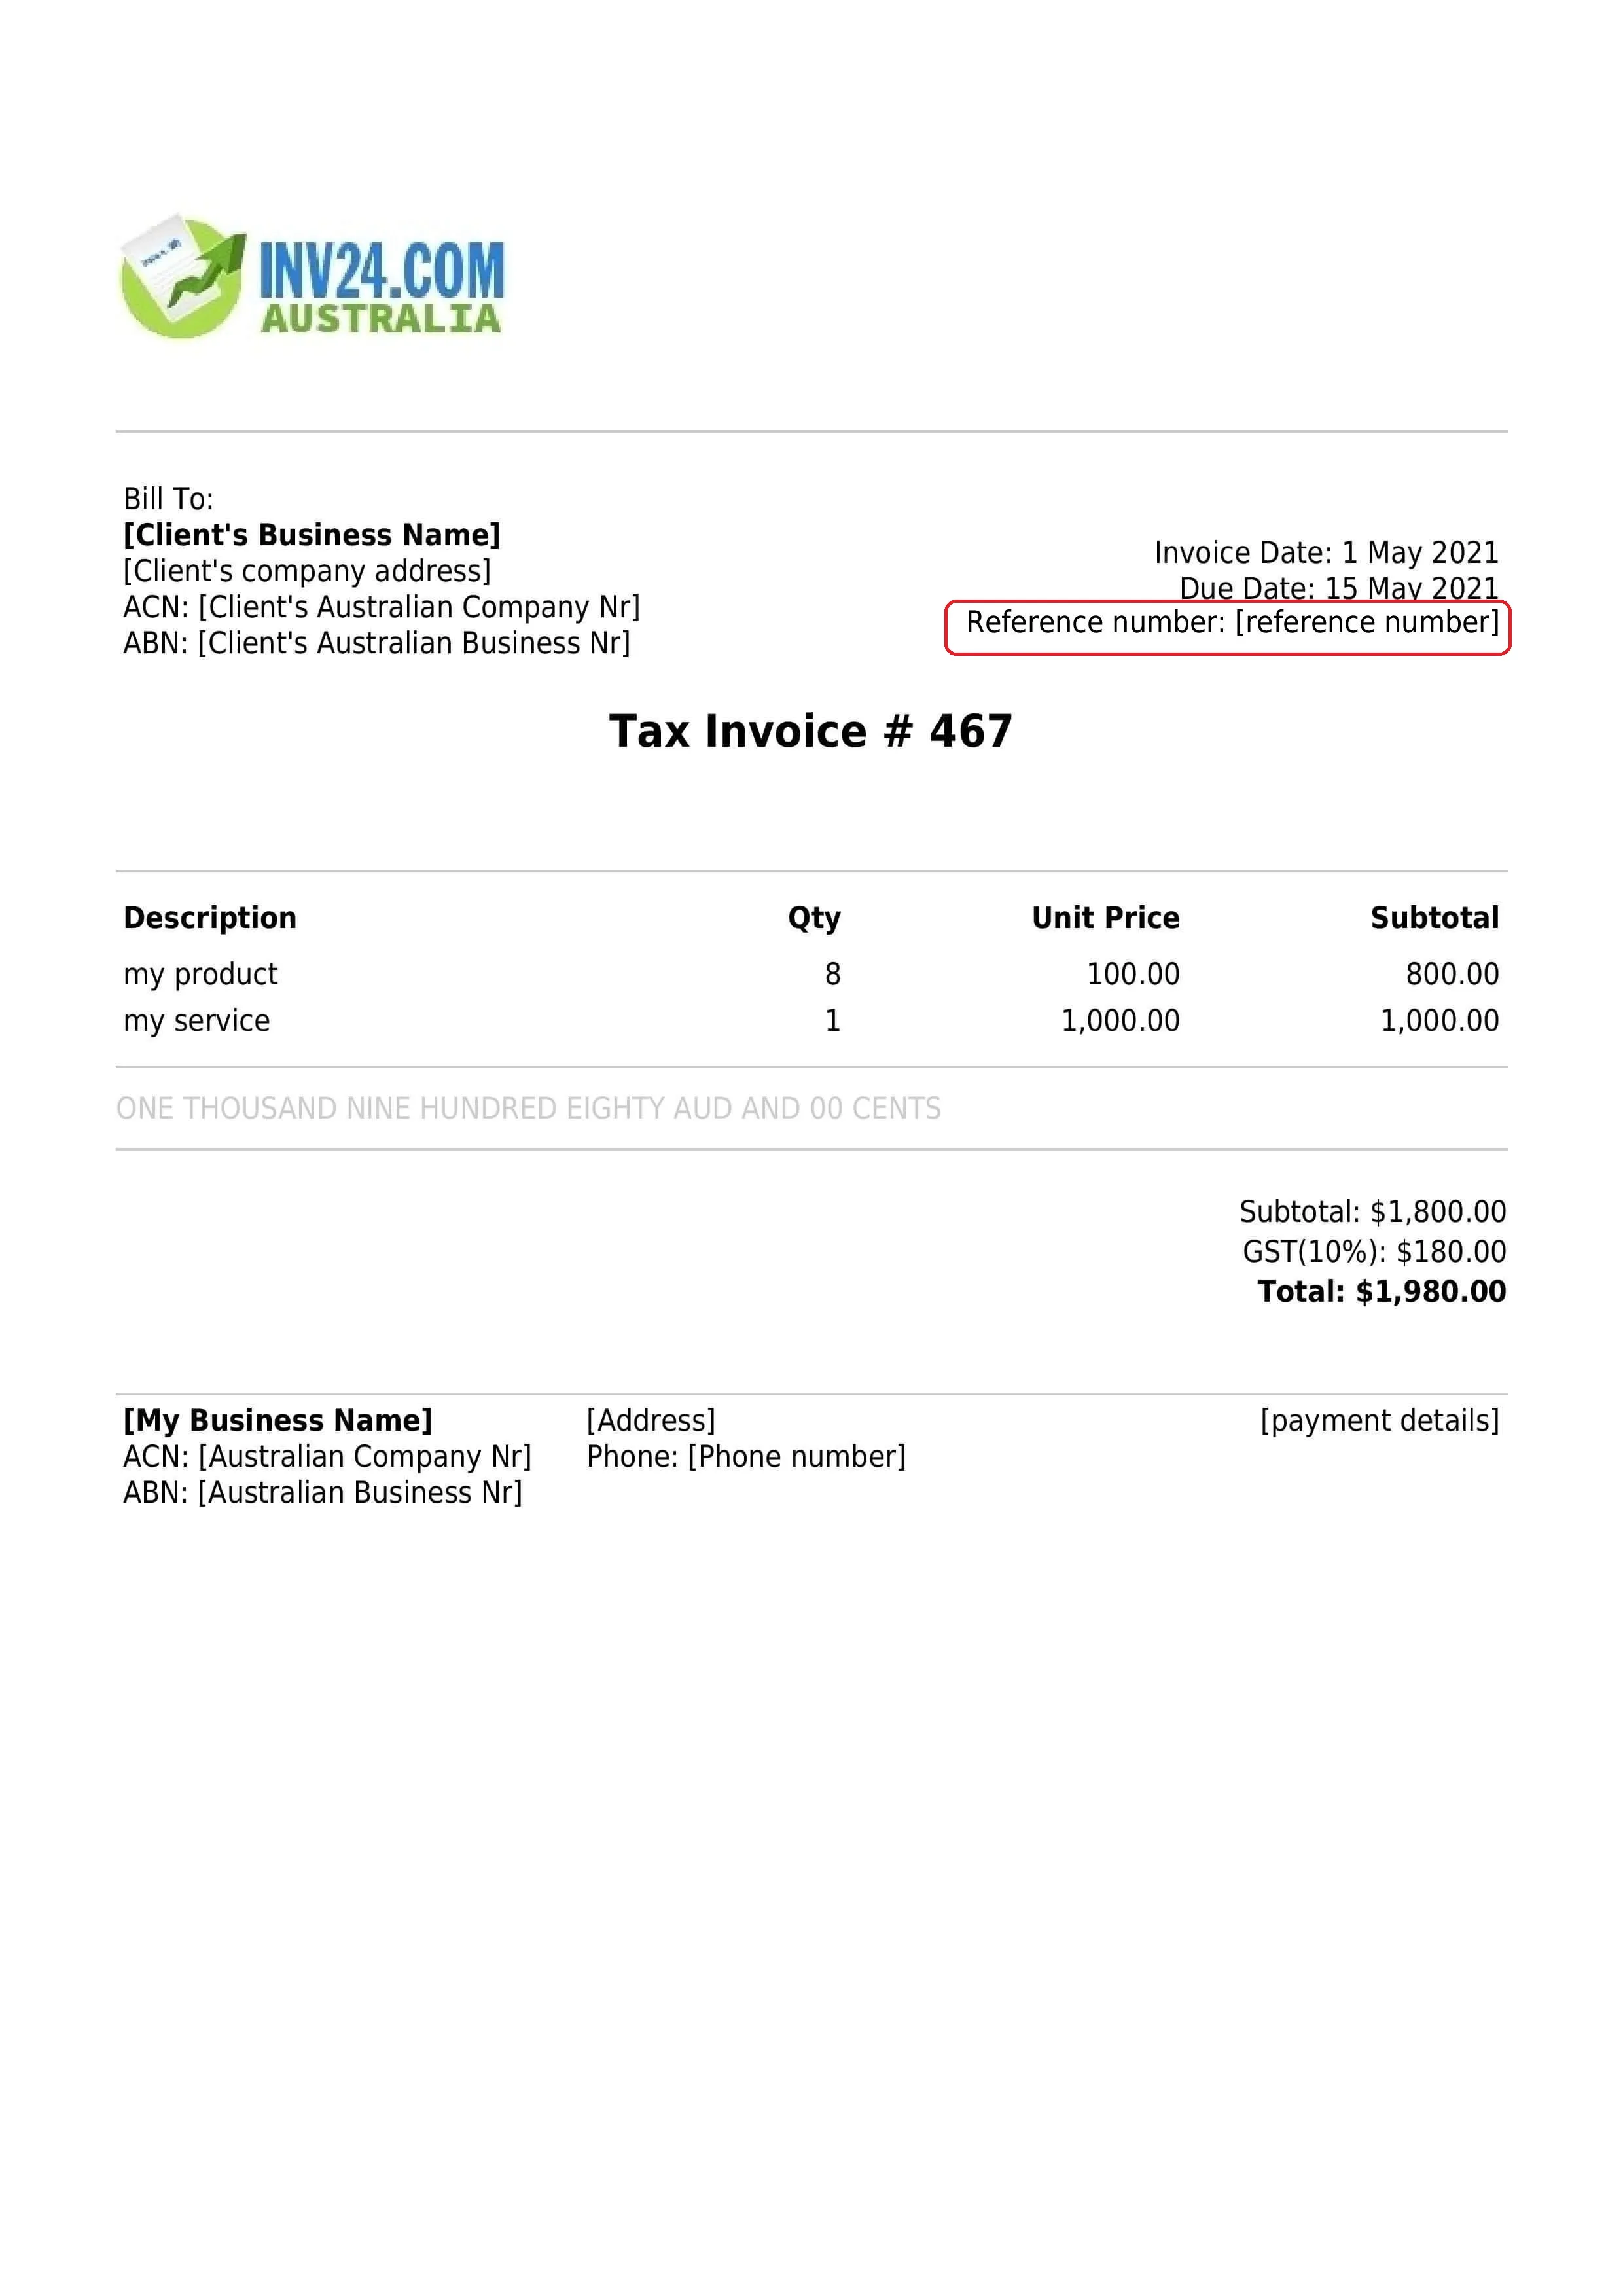 payment reference number on the invoice